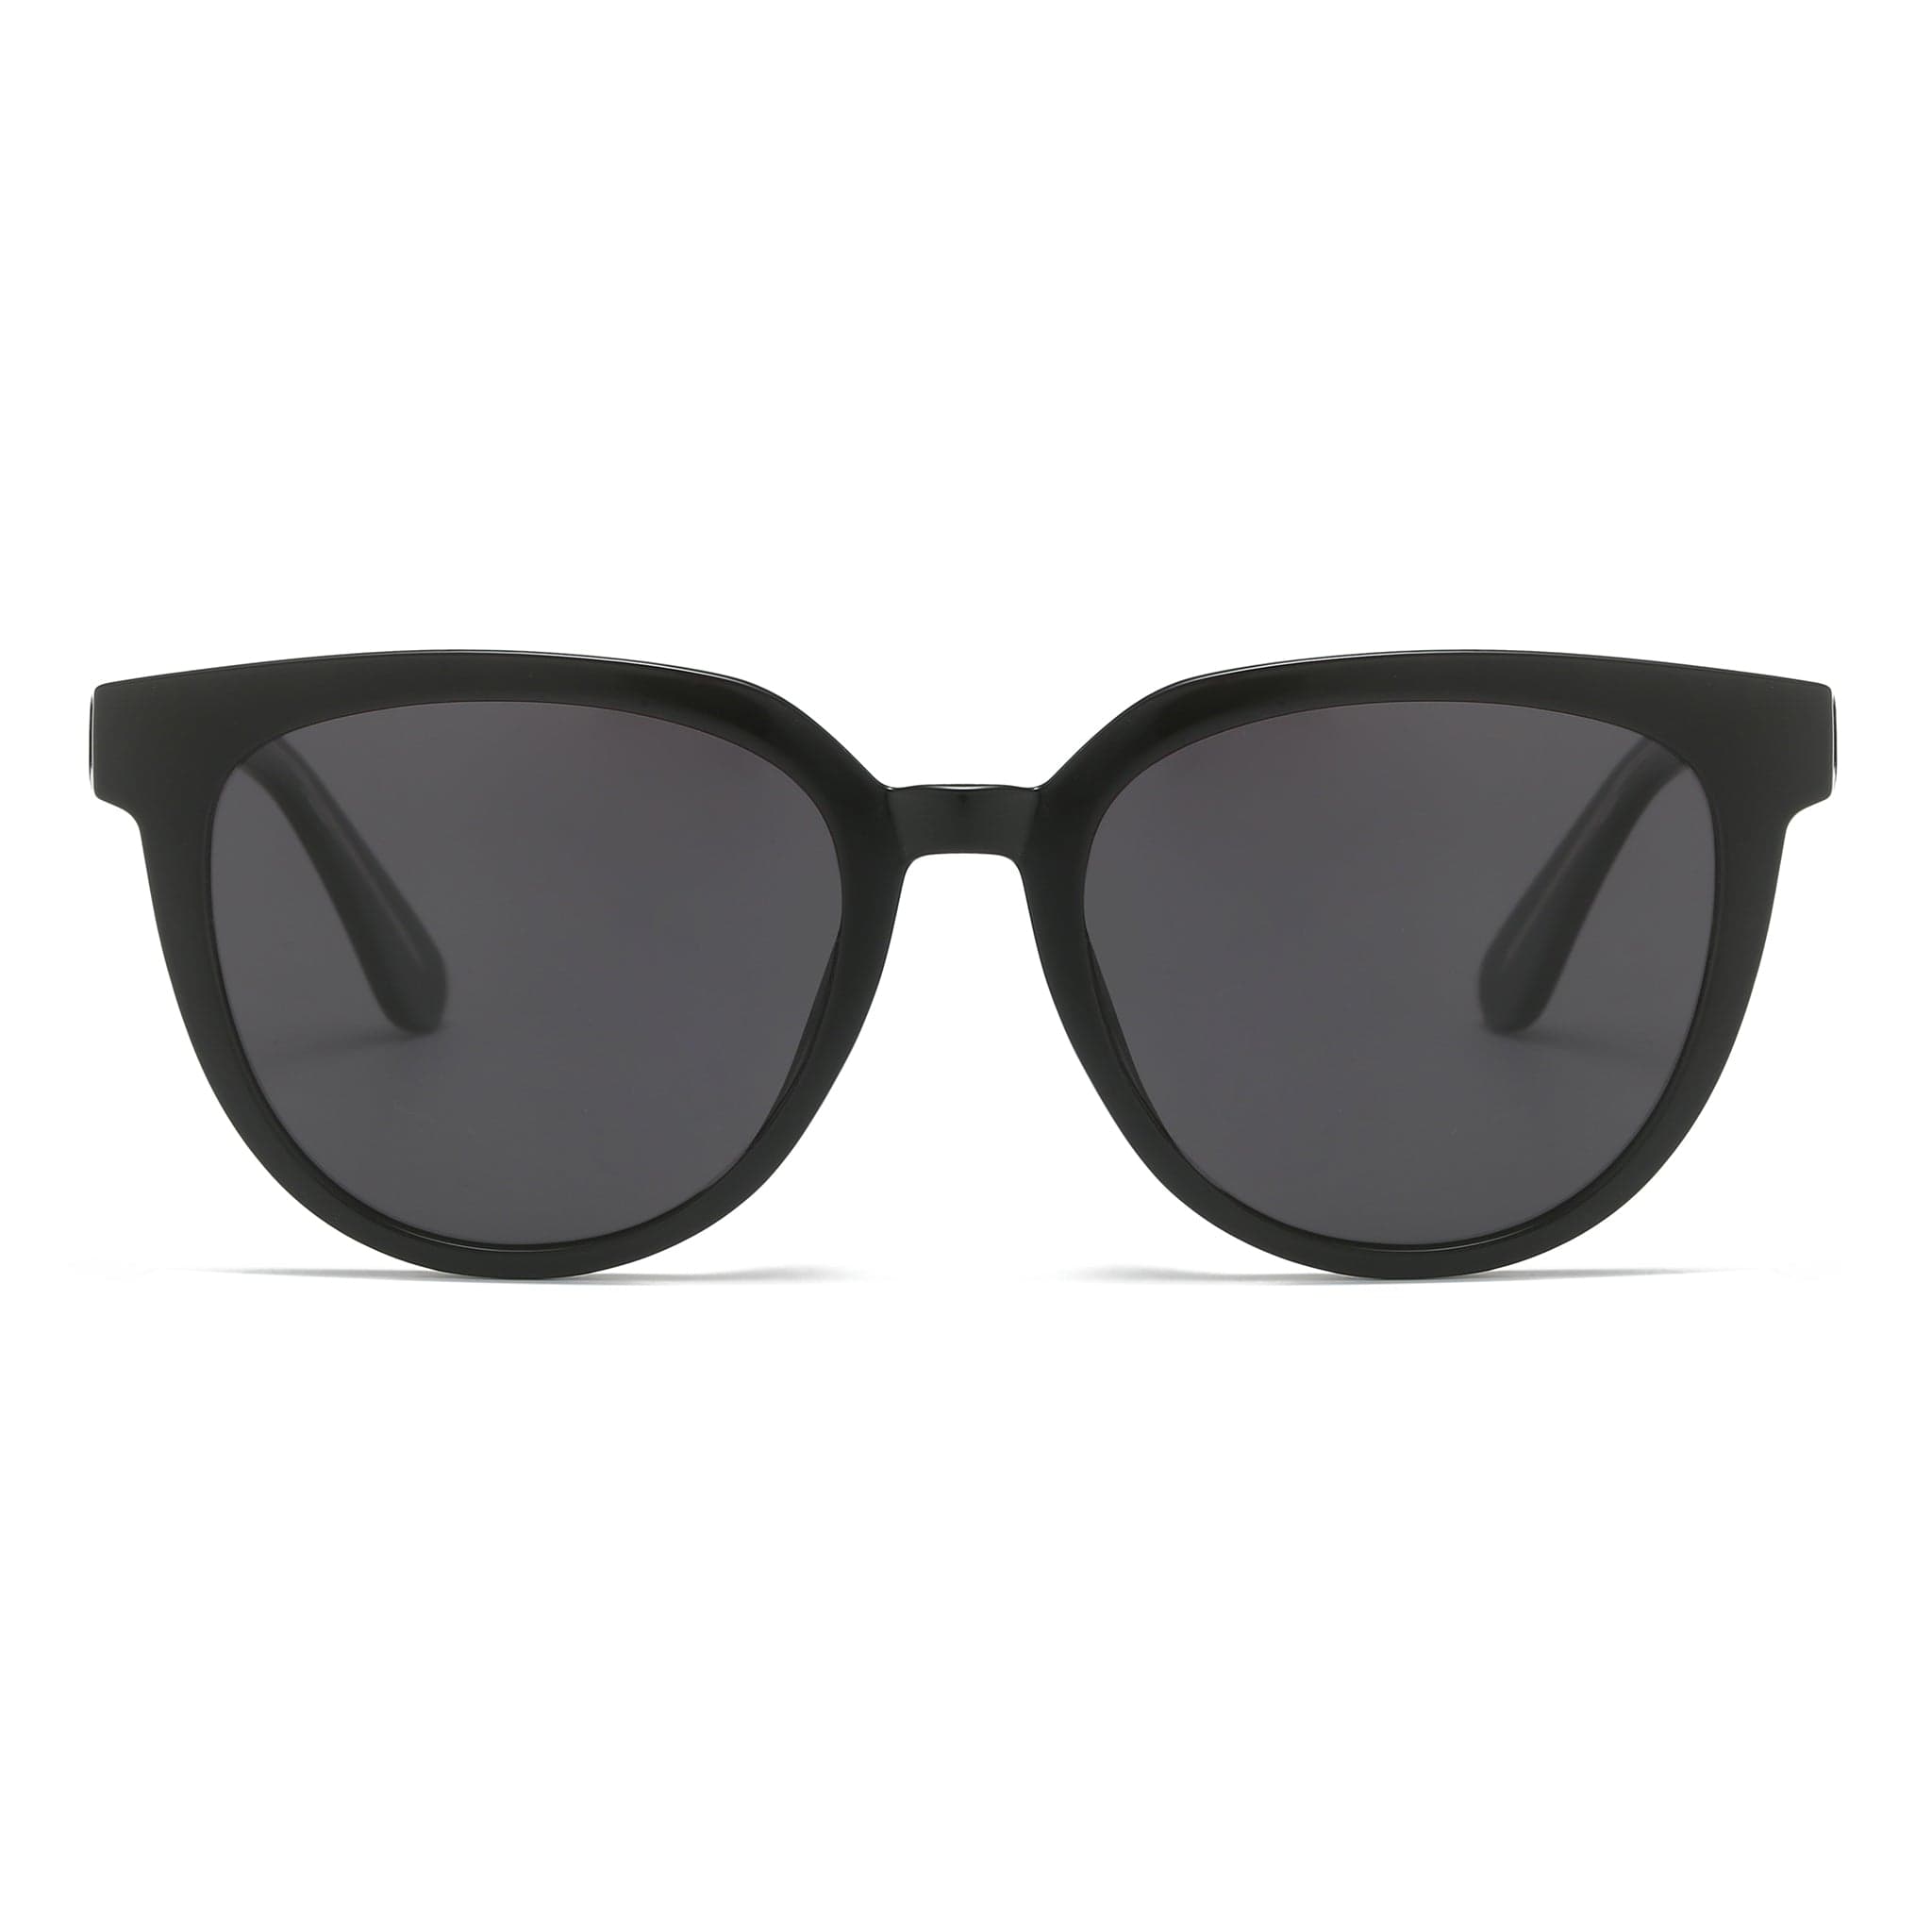 Buy Voyage Black and Rim-Less Rectangle Sunglasses for Unisex (3405MG3786)  Online